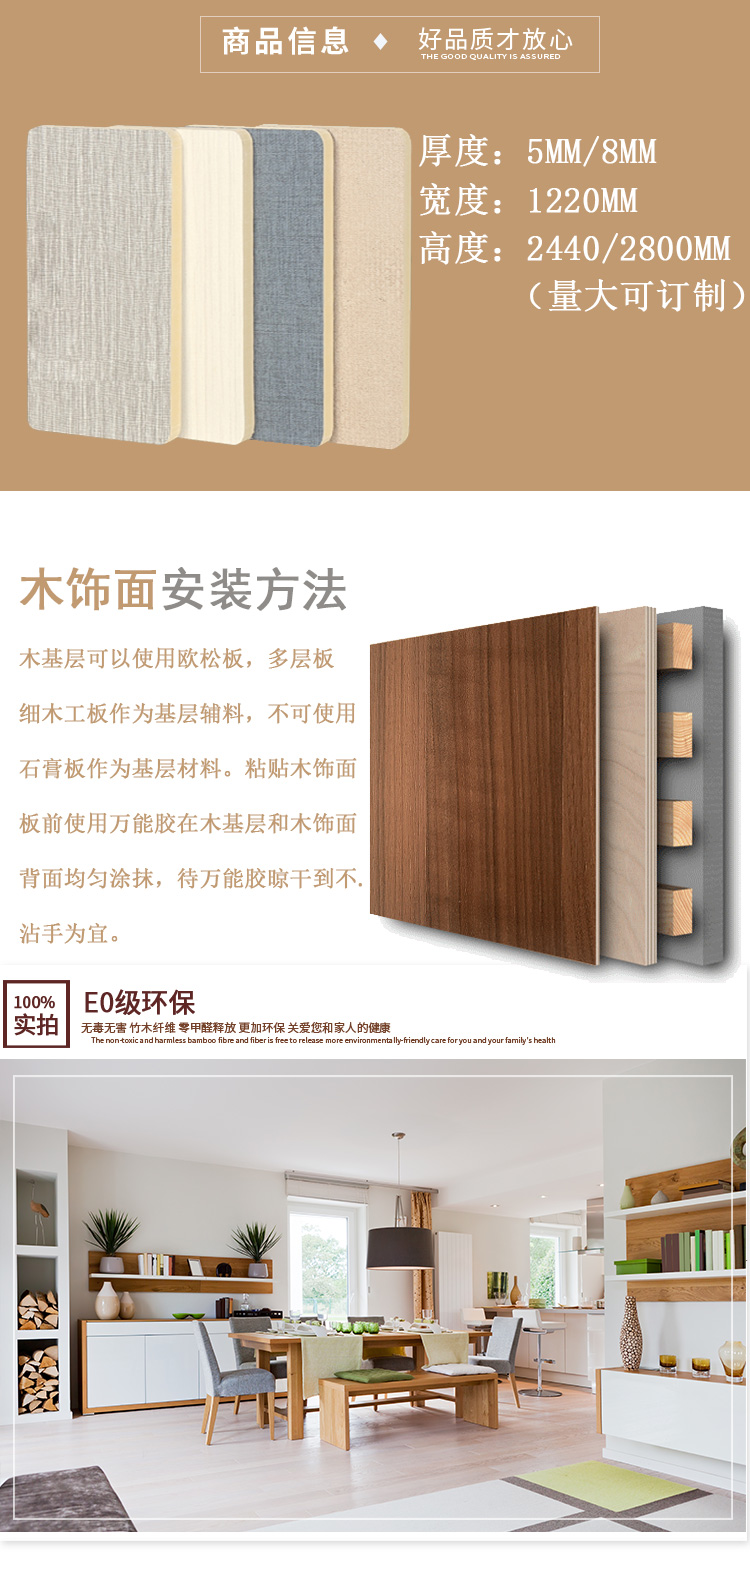 Fireproof and moisture-proof wooden decorative panels, hotel home decoration, work equipment, wall protection panels, bedroom decorative panels